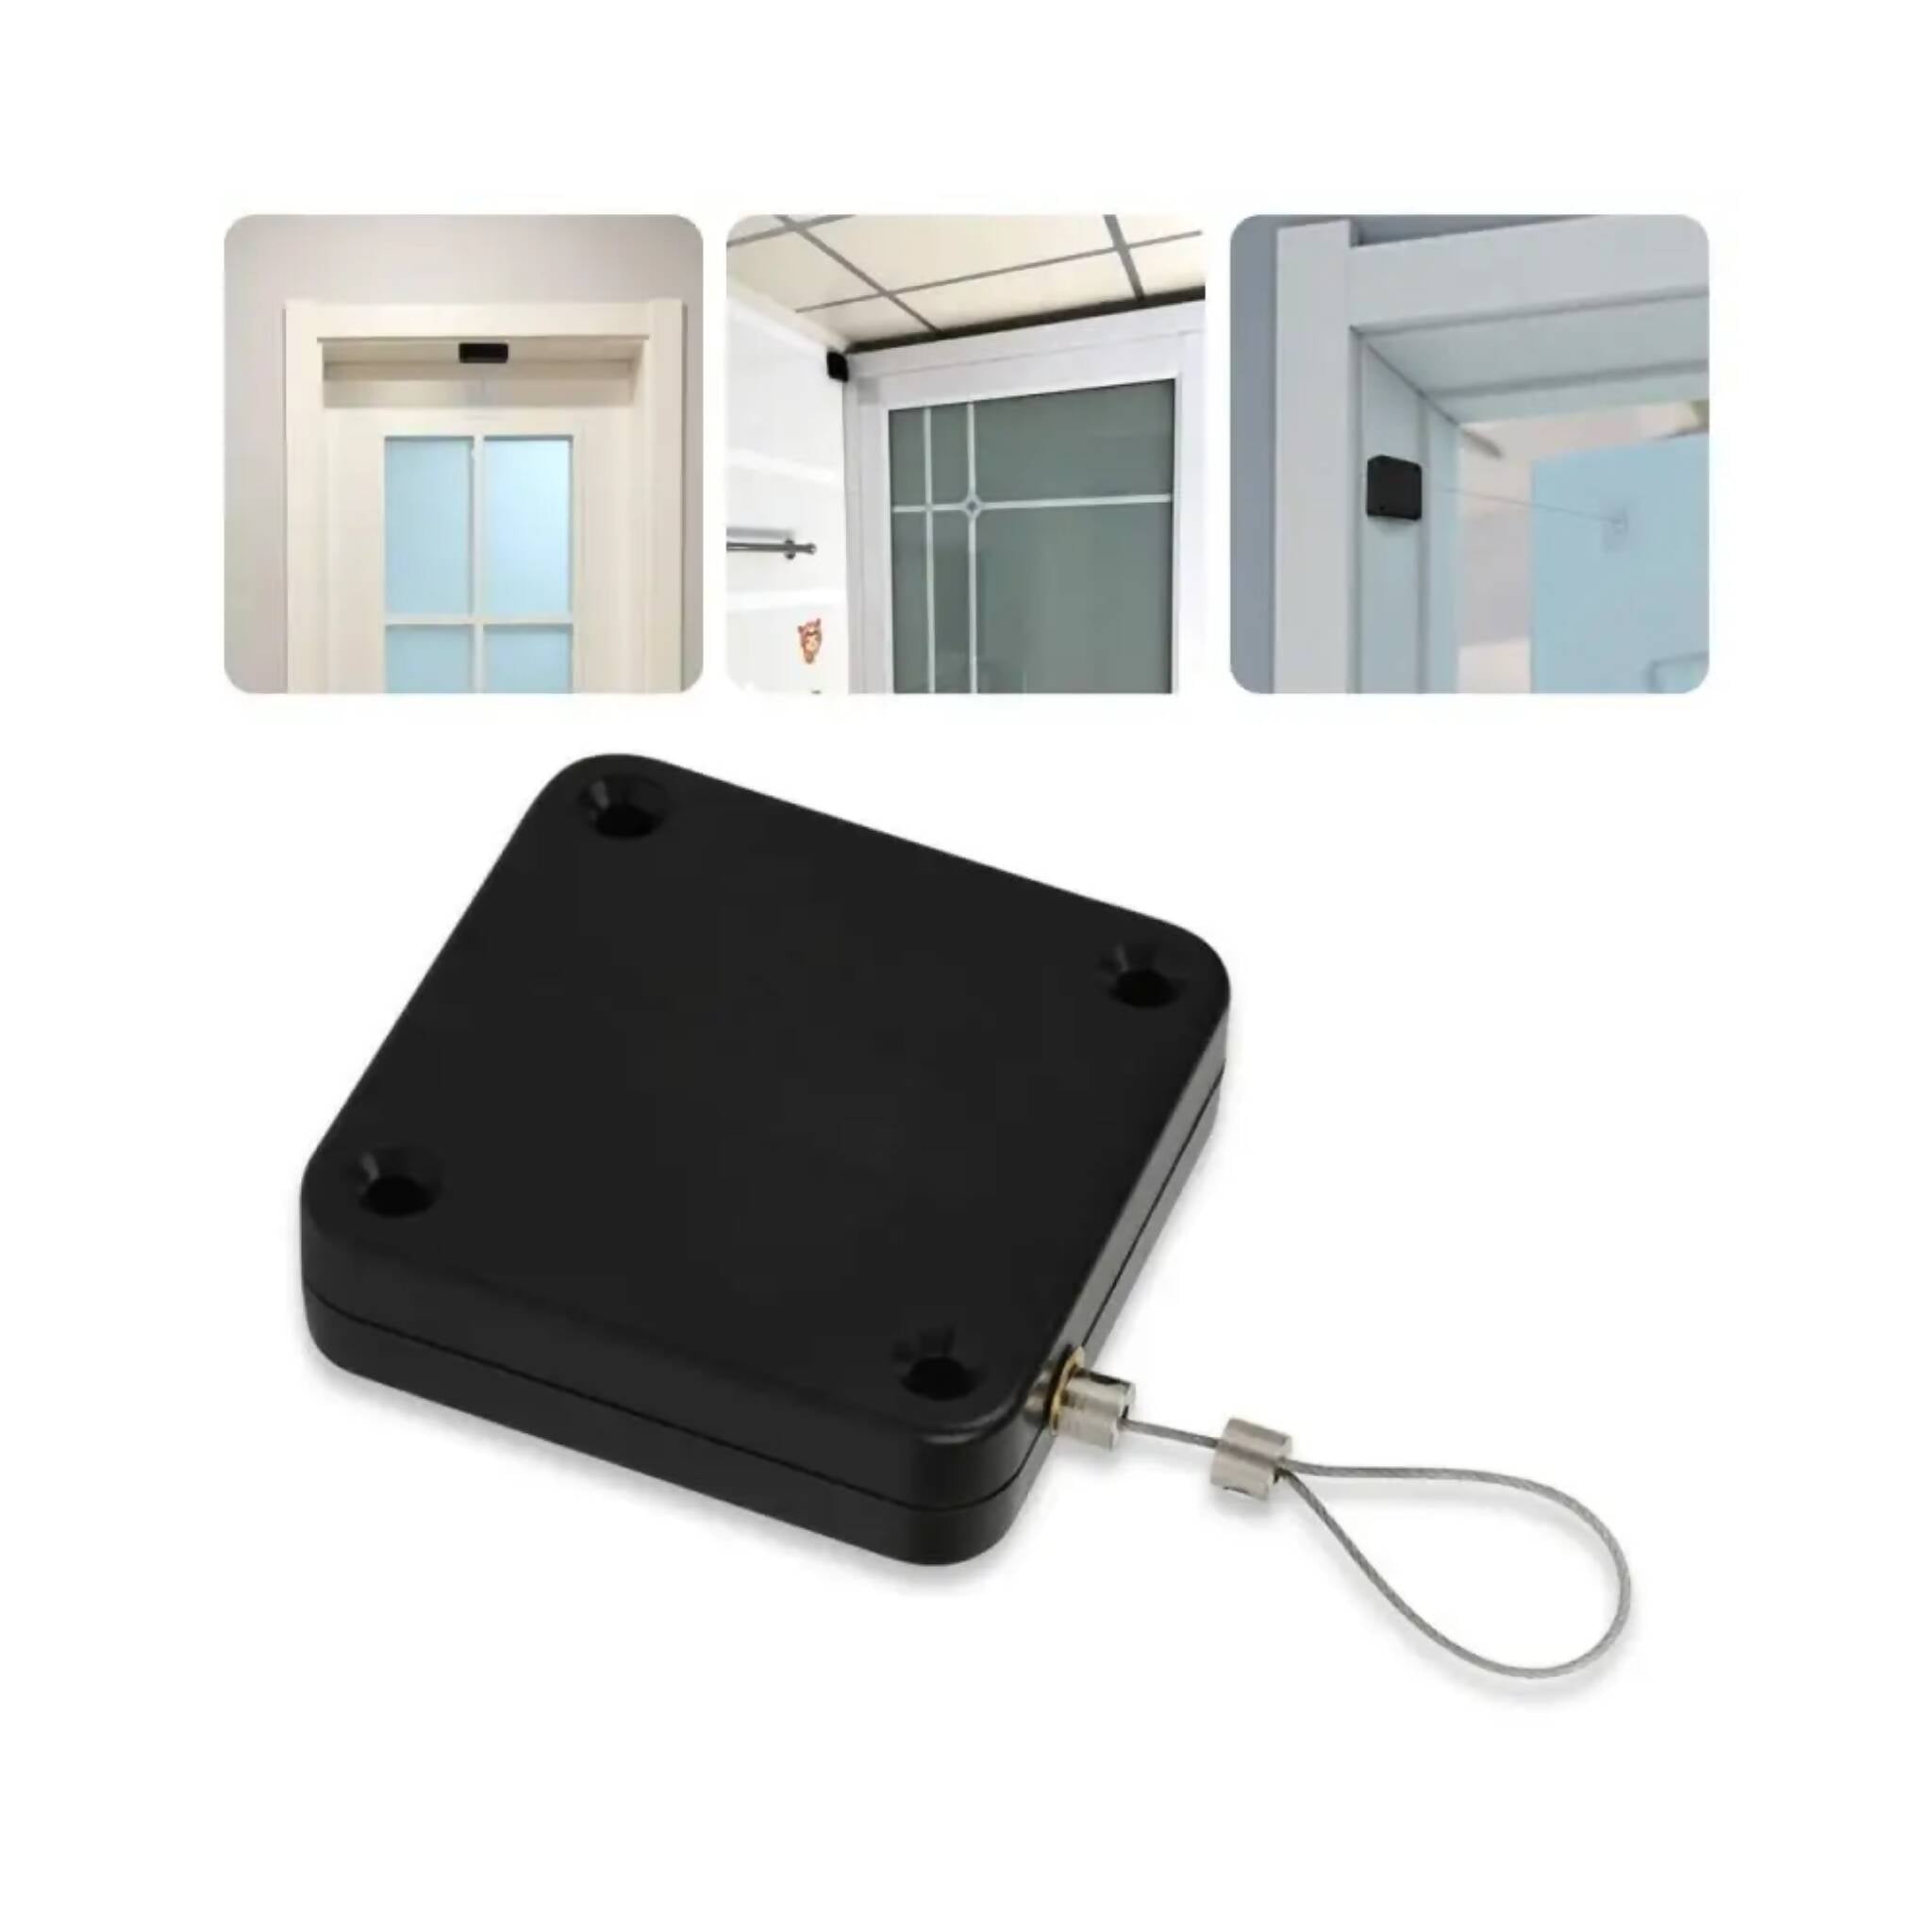 Automatic Sticky Door Closer, Efficient, Durable & Multi-Functional